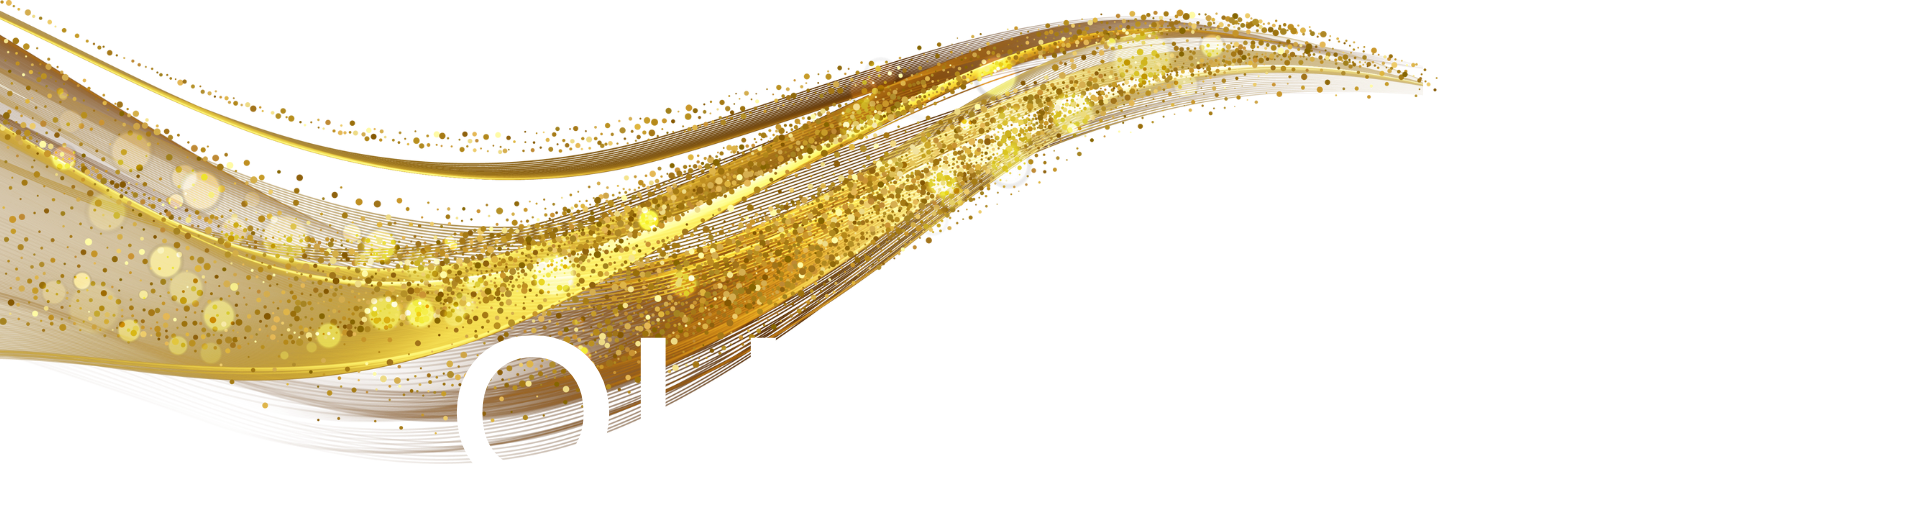 Our Team text with unique sparkly golden swirl graphic in the background